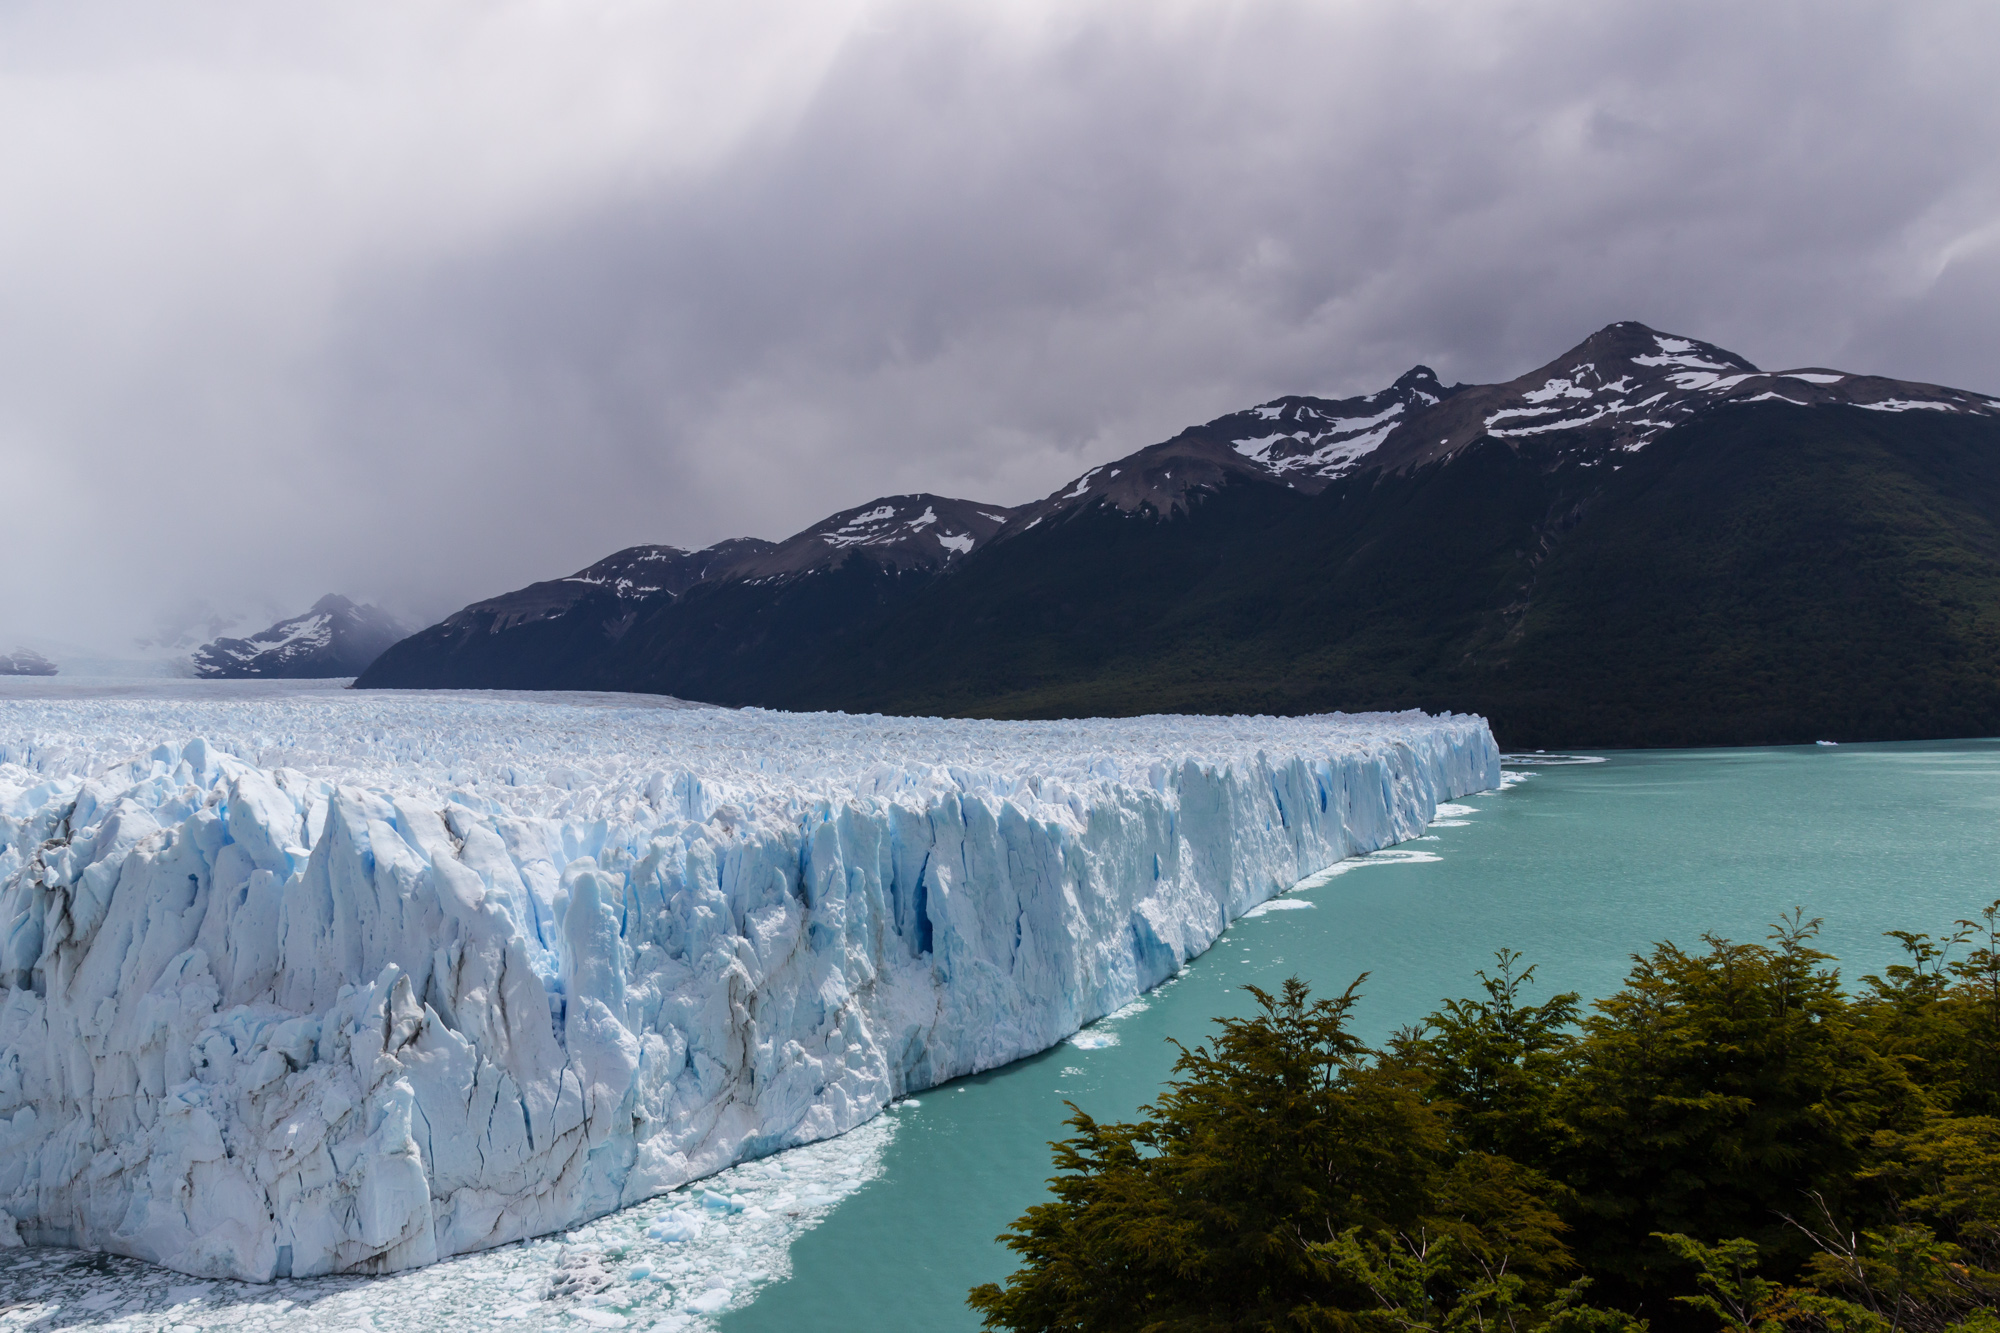 Spontaneous calving events send tonnes of ice crashing into the aquamarine waters of Lago Argentina, the biggest freshwater body in Argentina